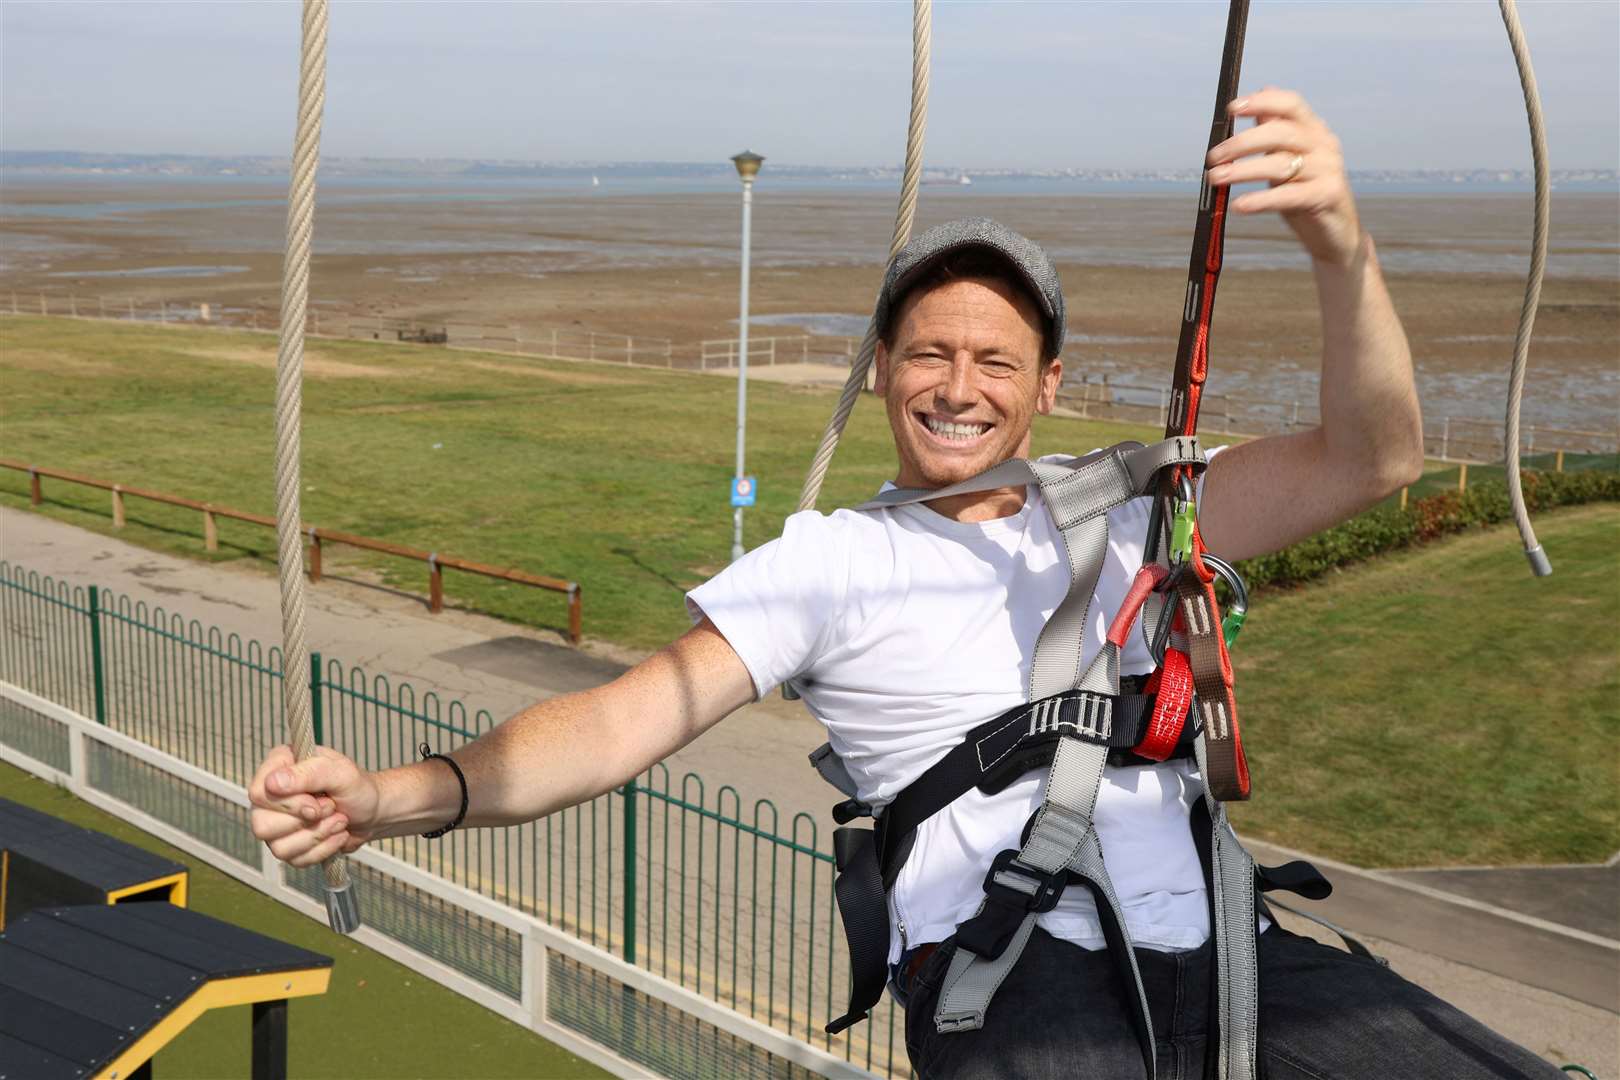 Joe Swash was seen at the holiday park today. Picture: Lia Toby/PA Wire